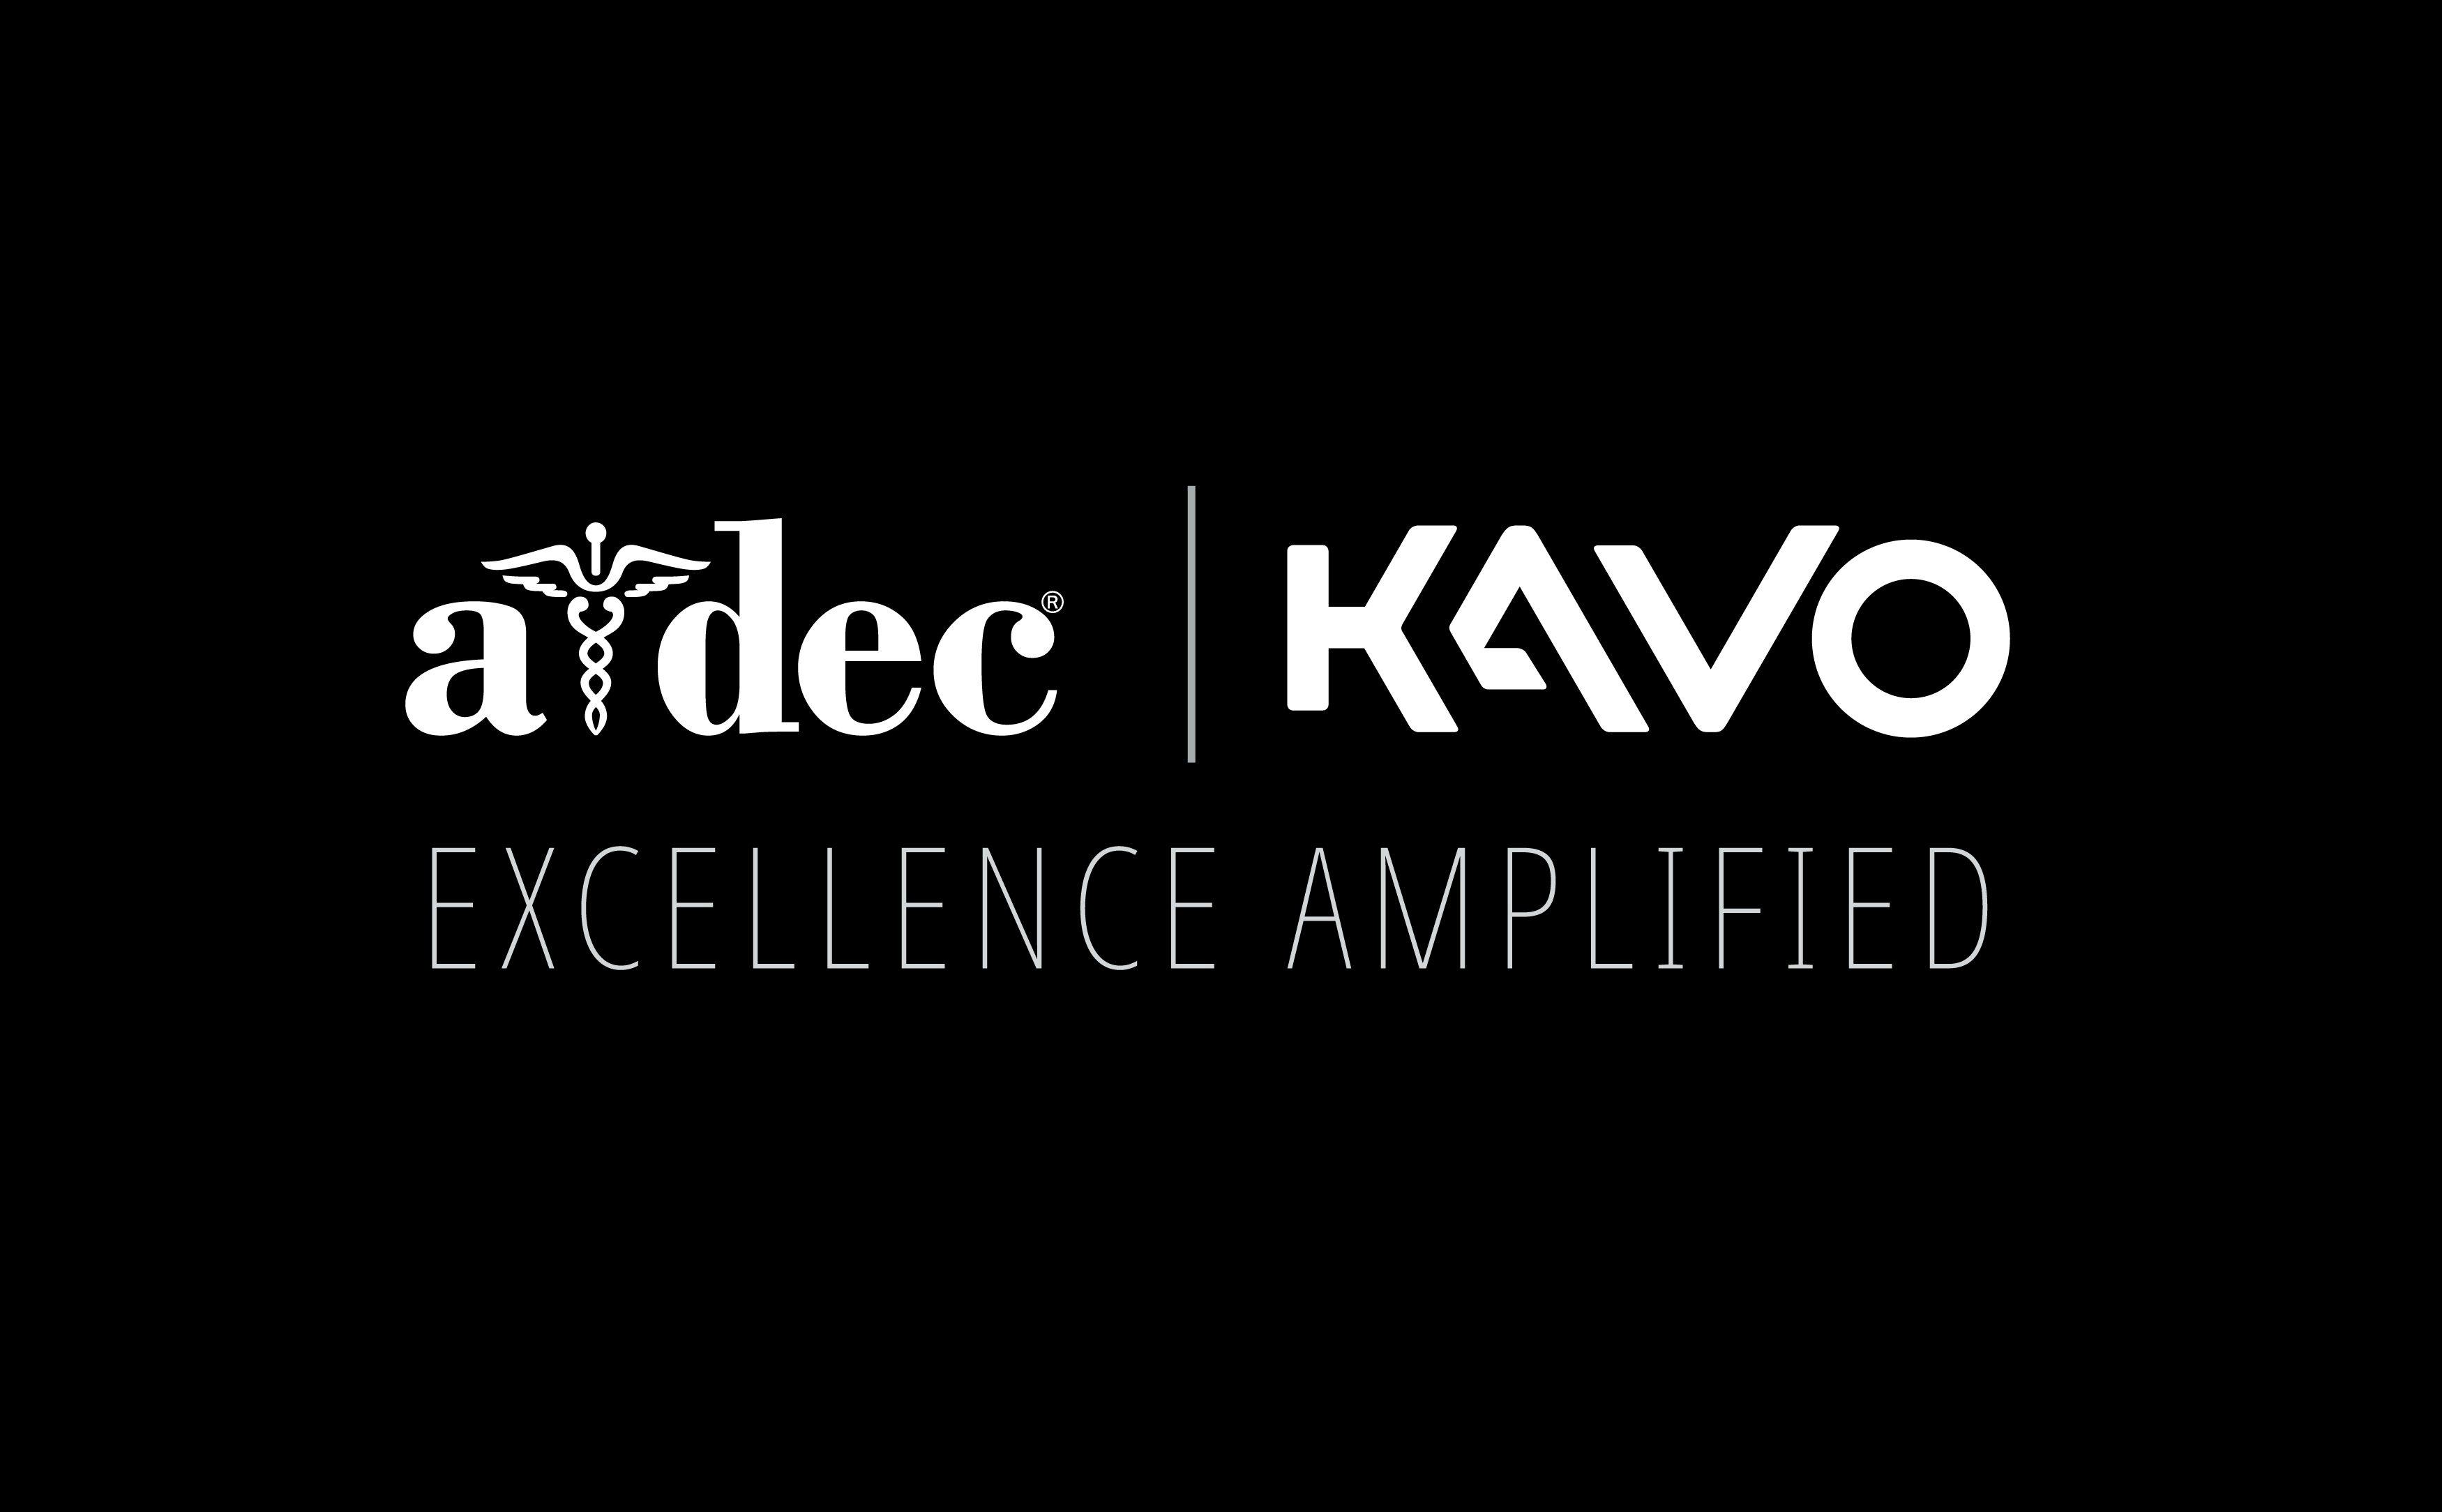 A-dec and KaVo Announce Collaboration